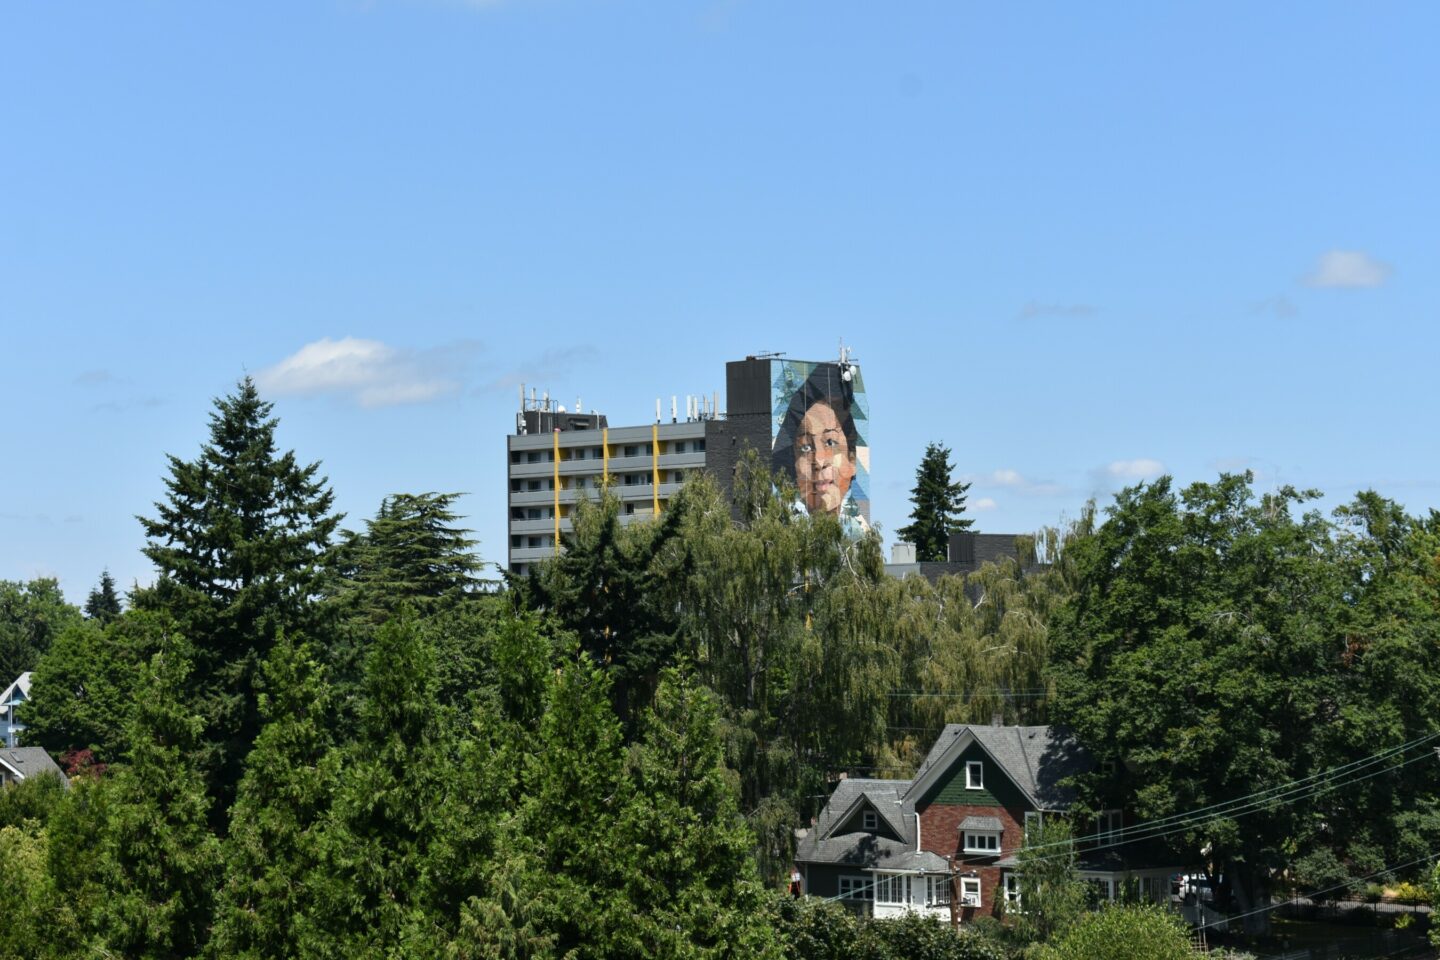 Mural of a woman seen above the tree line at Schrunk Riverview Tower